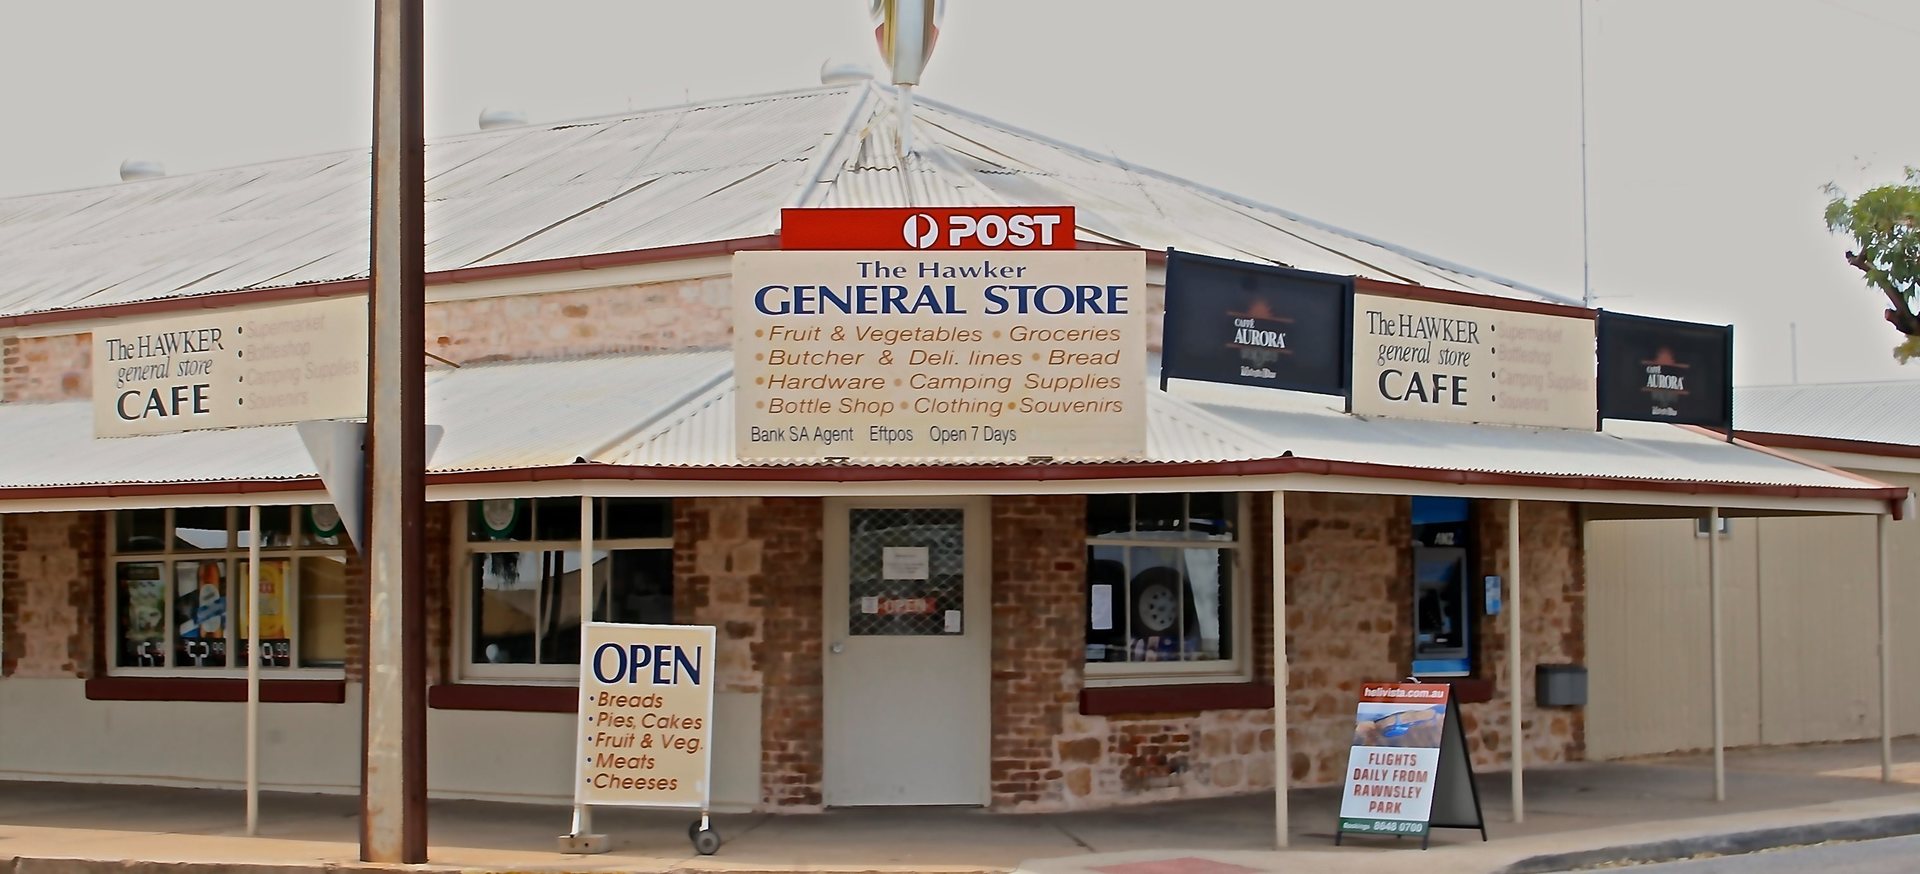 Hawker General Store & Post Office - $320,000...Business For Sale